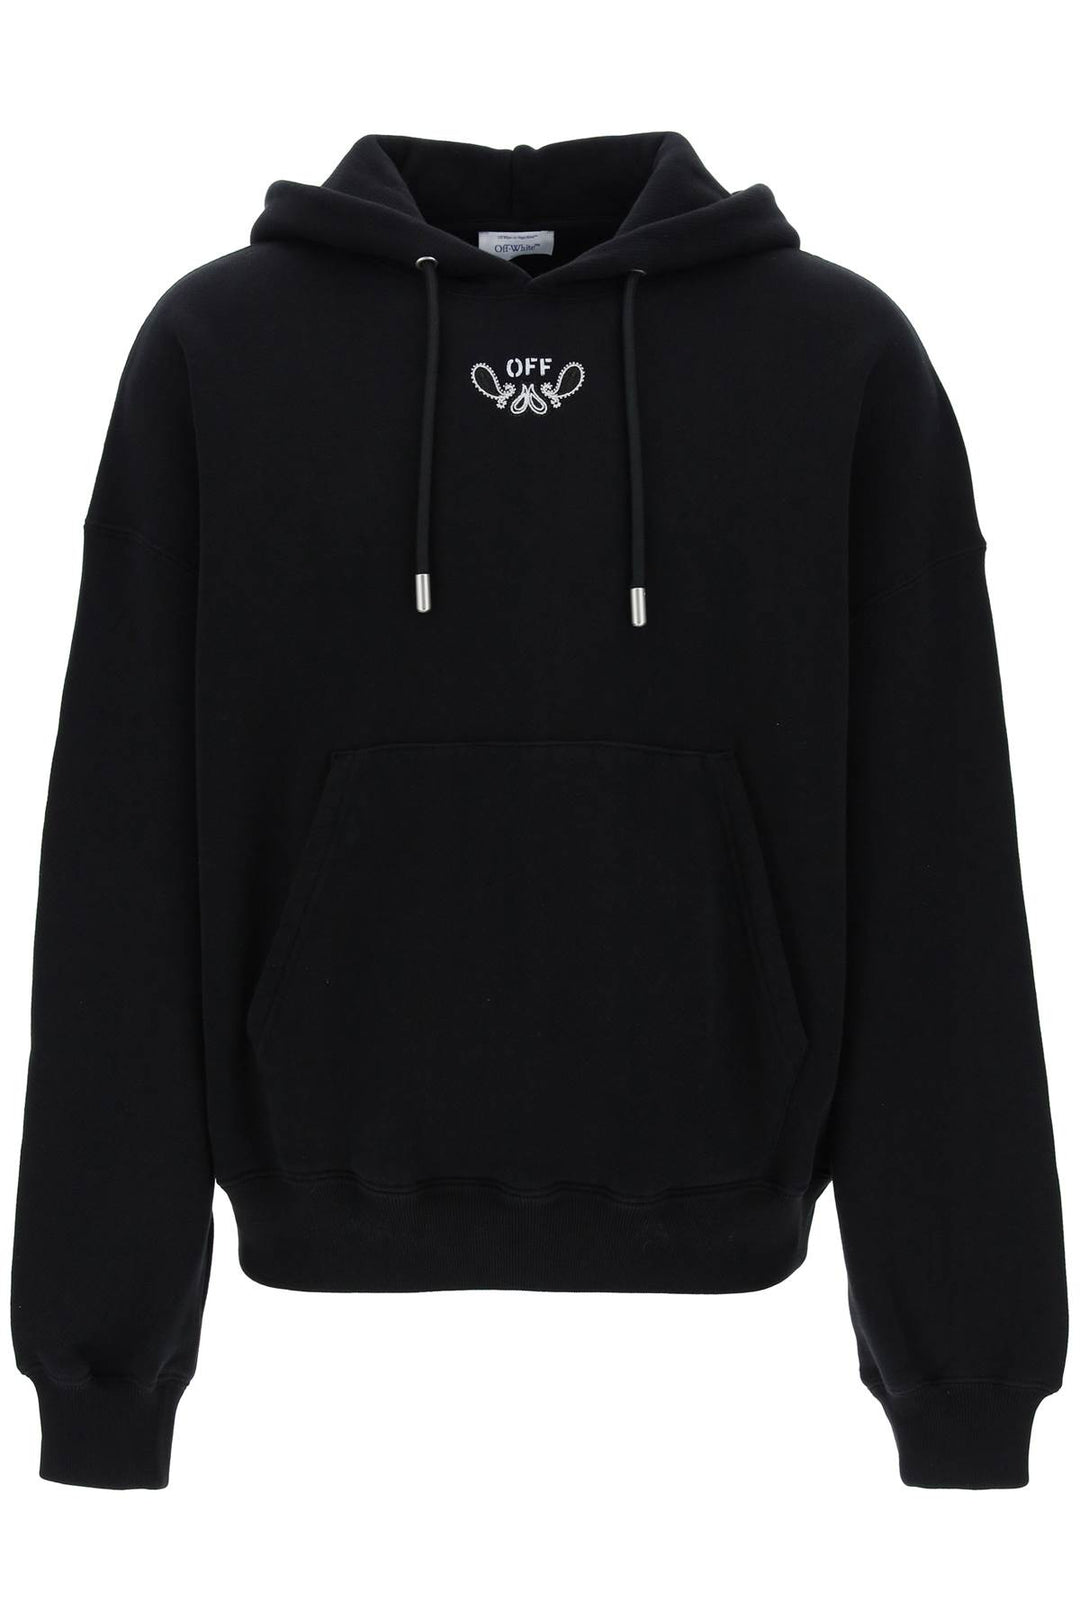 Off-white hooded sweatshirt with paisley-0